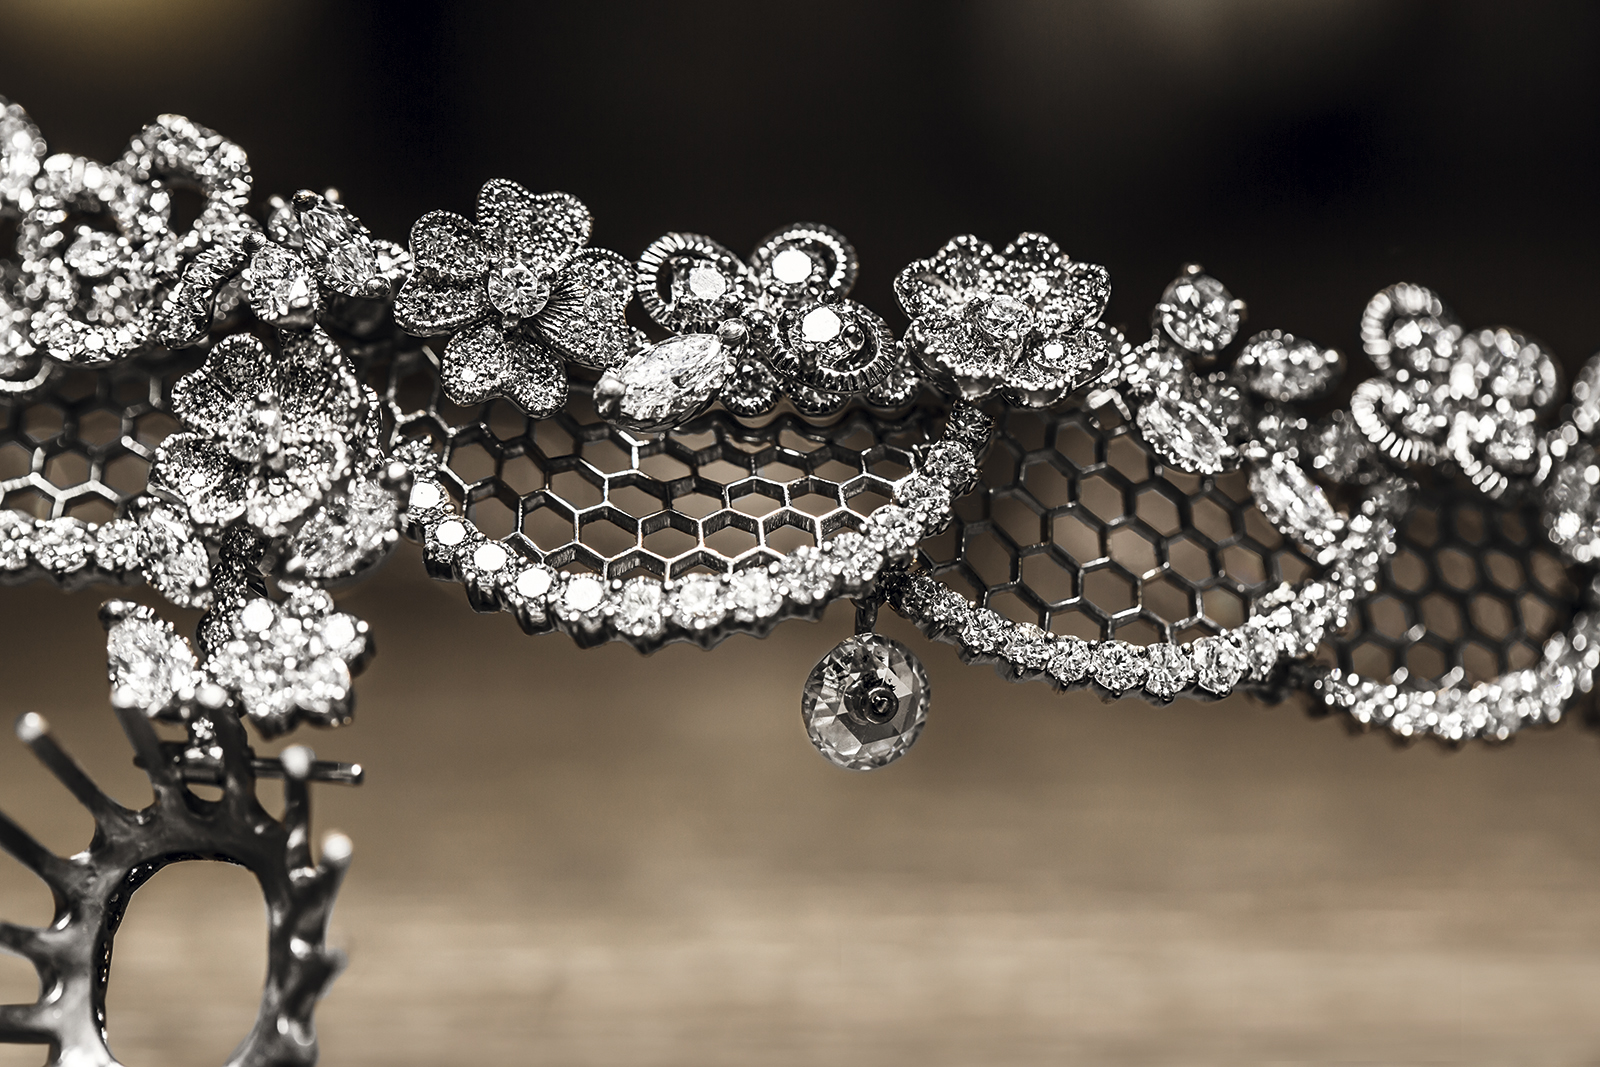 Dior Dior Dior: The latest fine jewellery collection from the eponymous ...